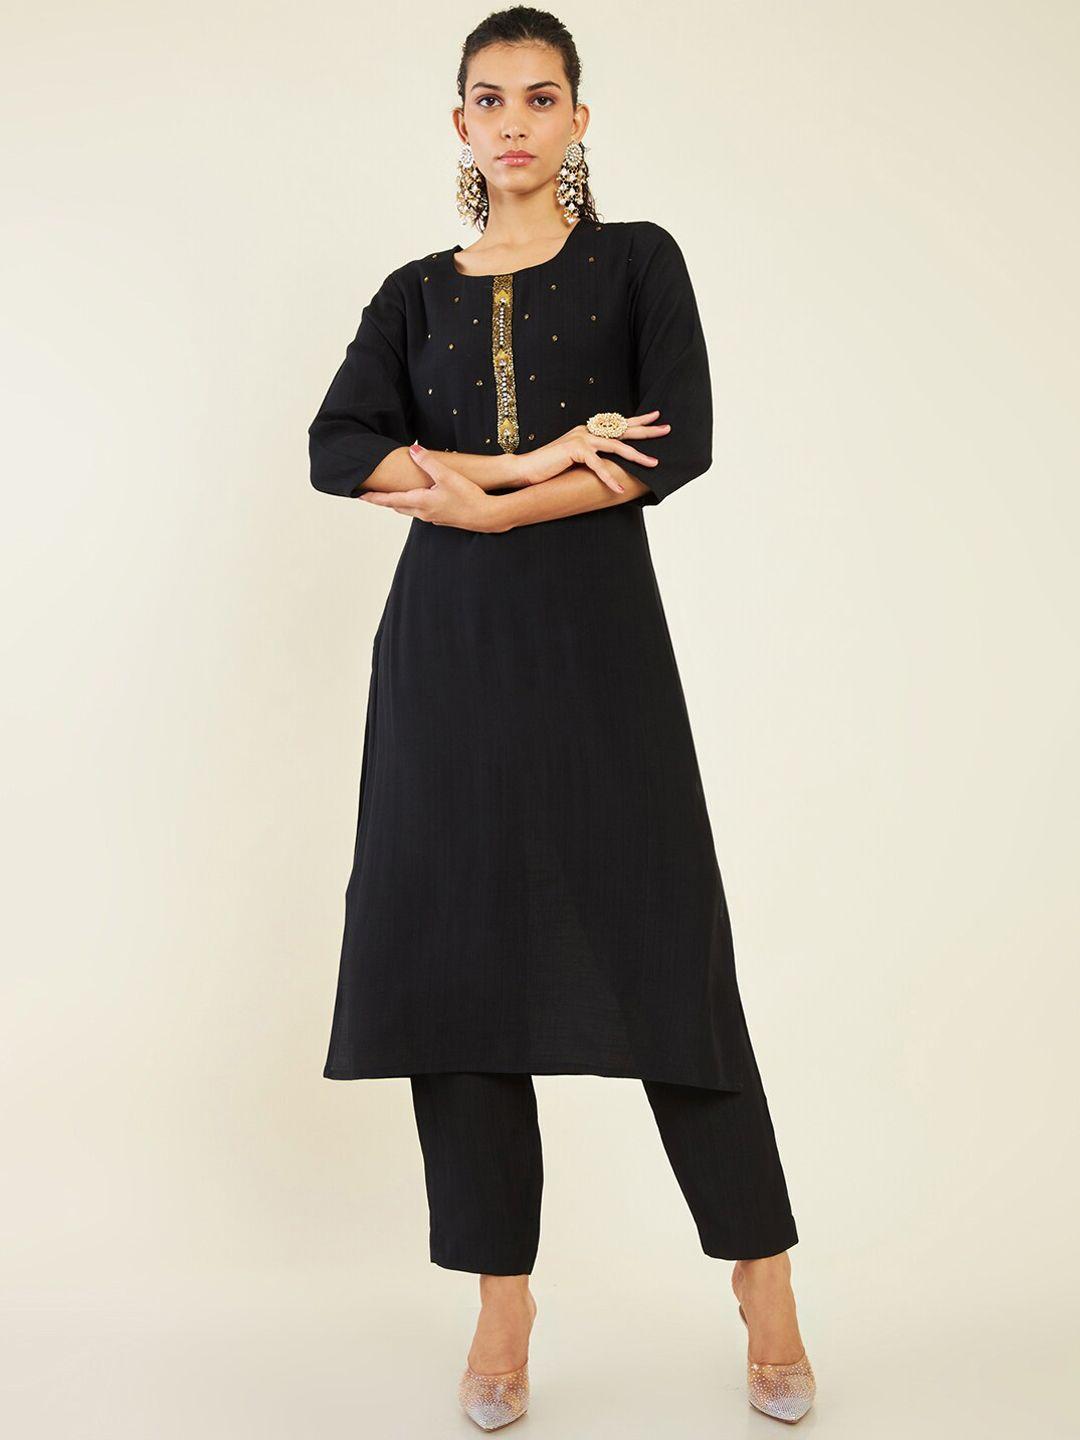 soch-floral-embroidered-beads-and-stones-kurta-with-trousers